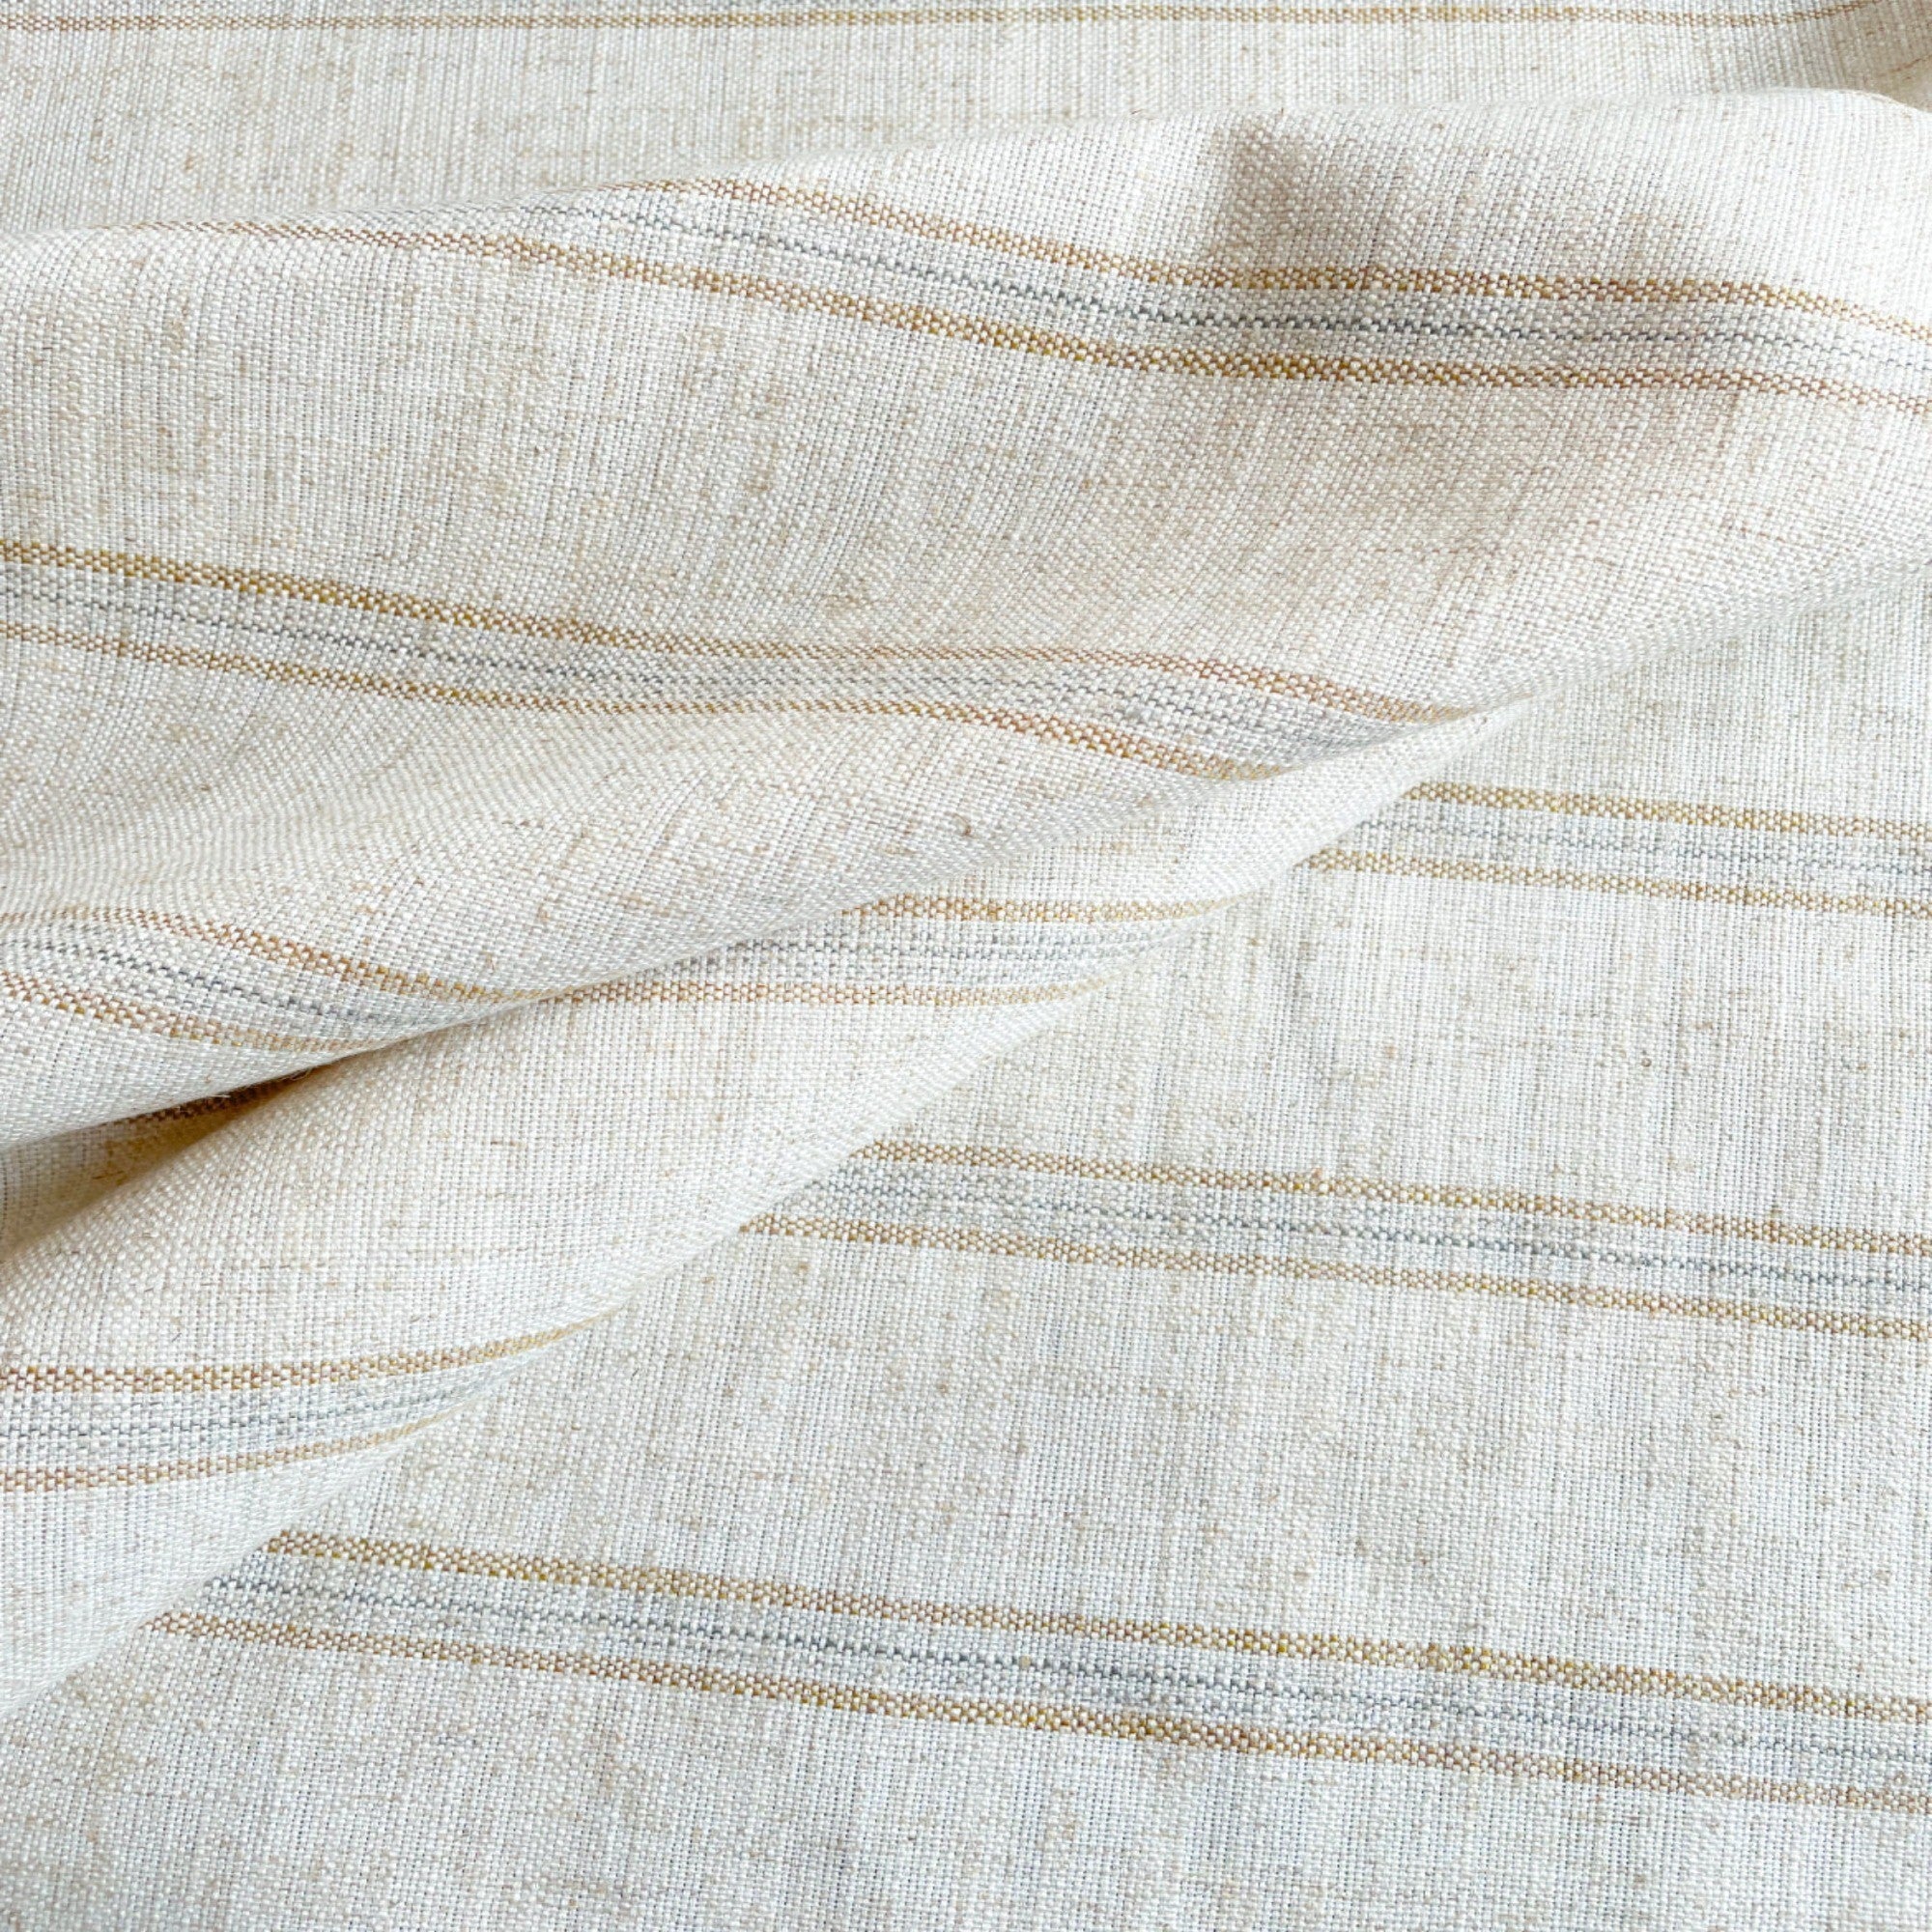 Pindler Sandstone Stripe Upholstery Fabric by the yard